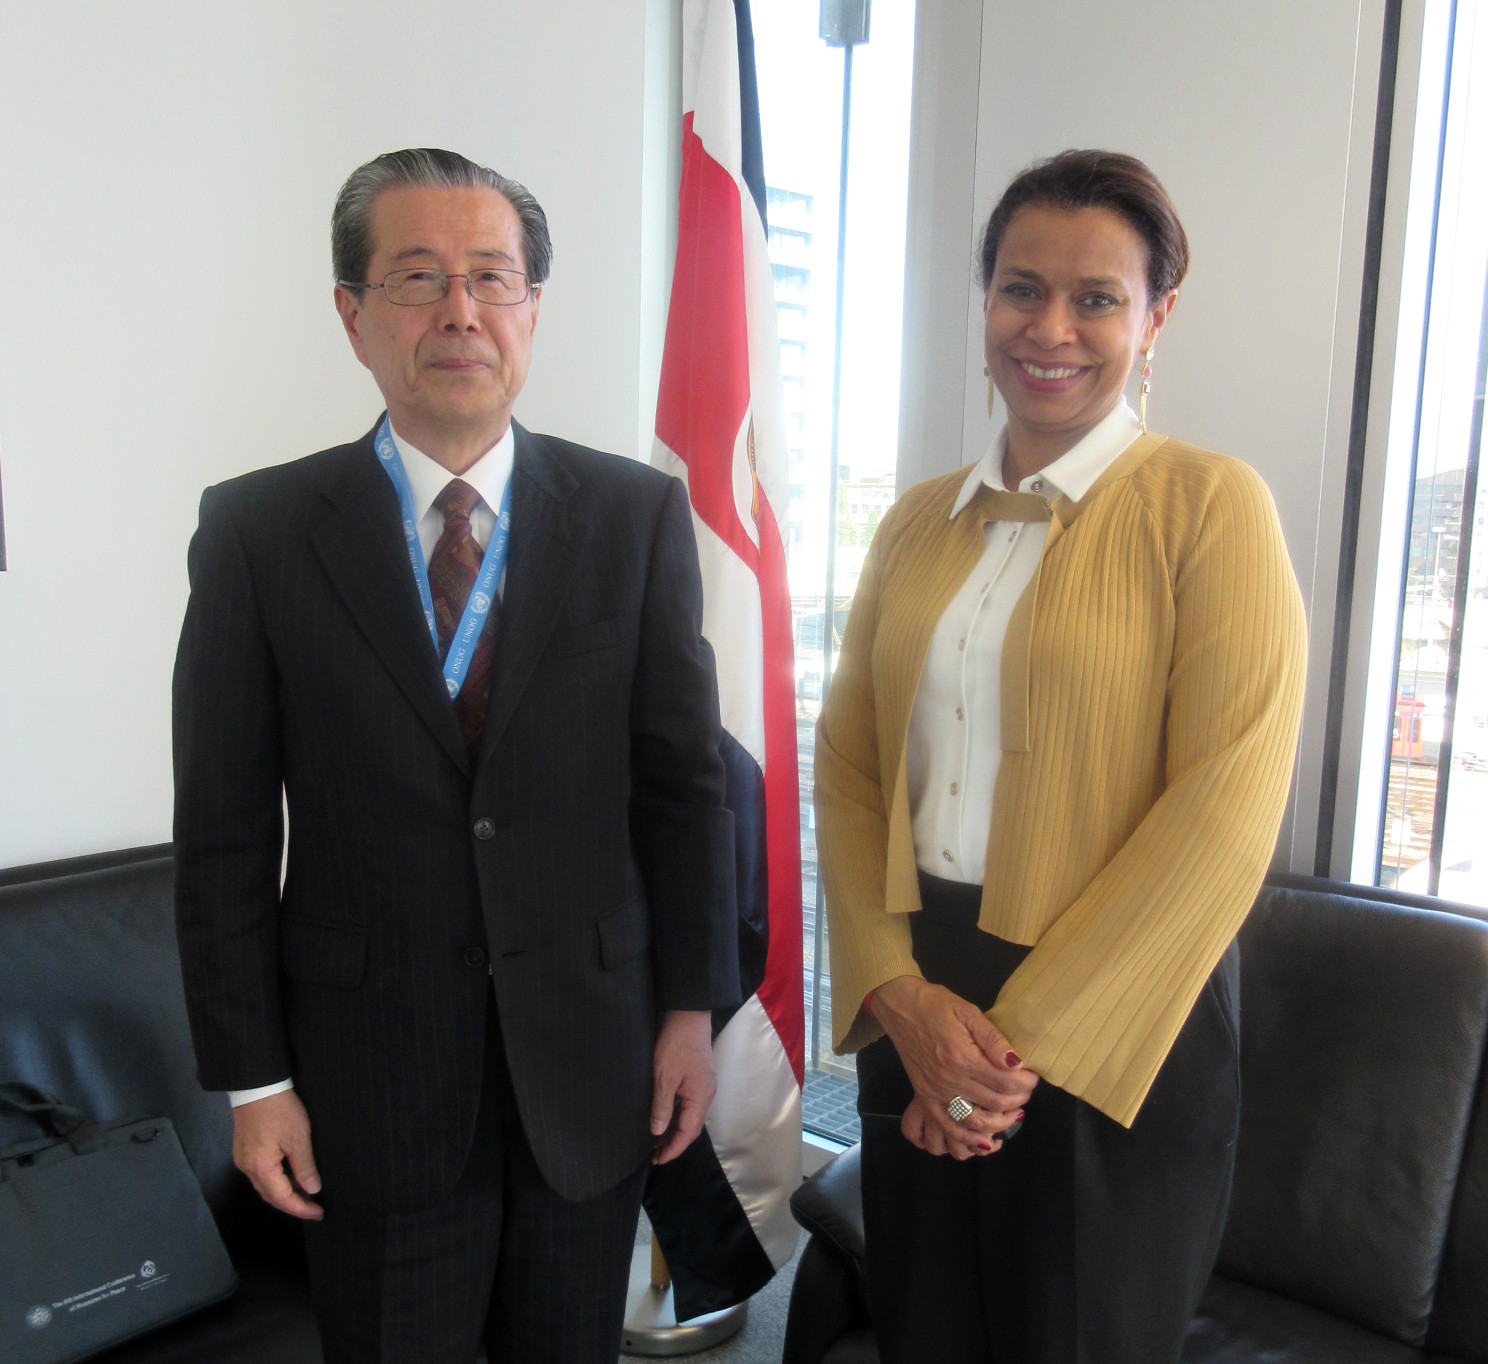 Meeting with Ms. Whyte Gómez, Permanent Representative of Costa Rica to the United Nations Office and other international organizations in Geneva